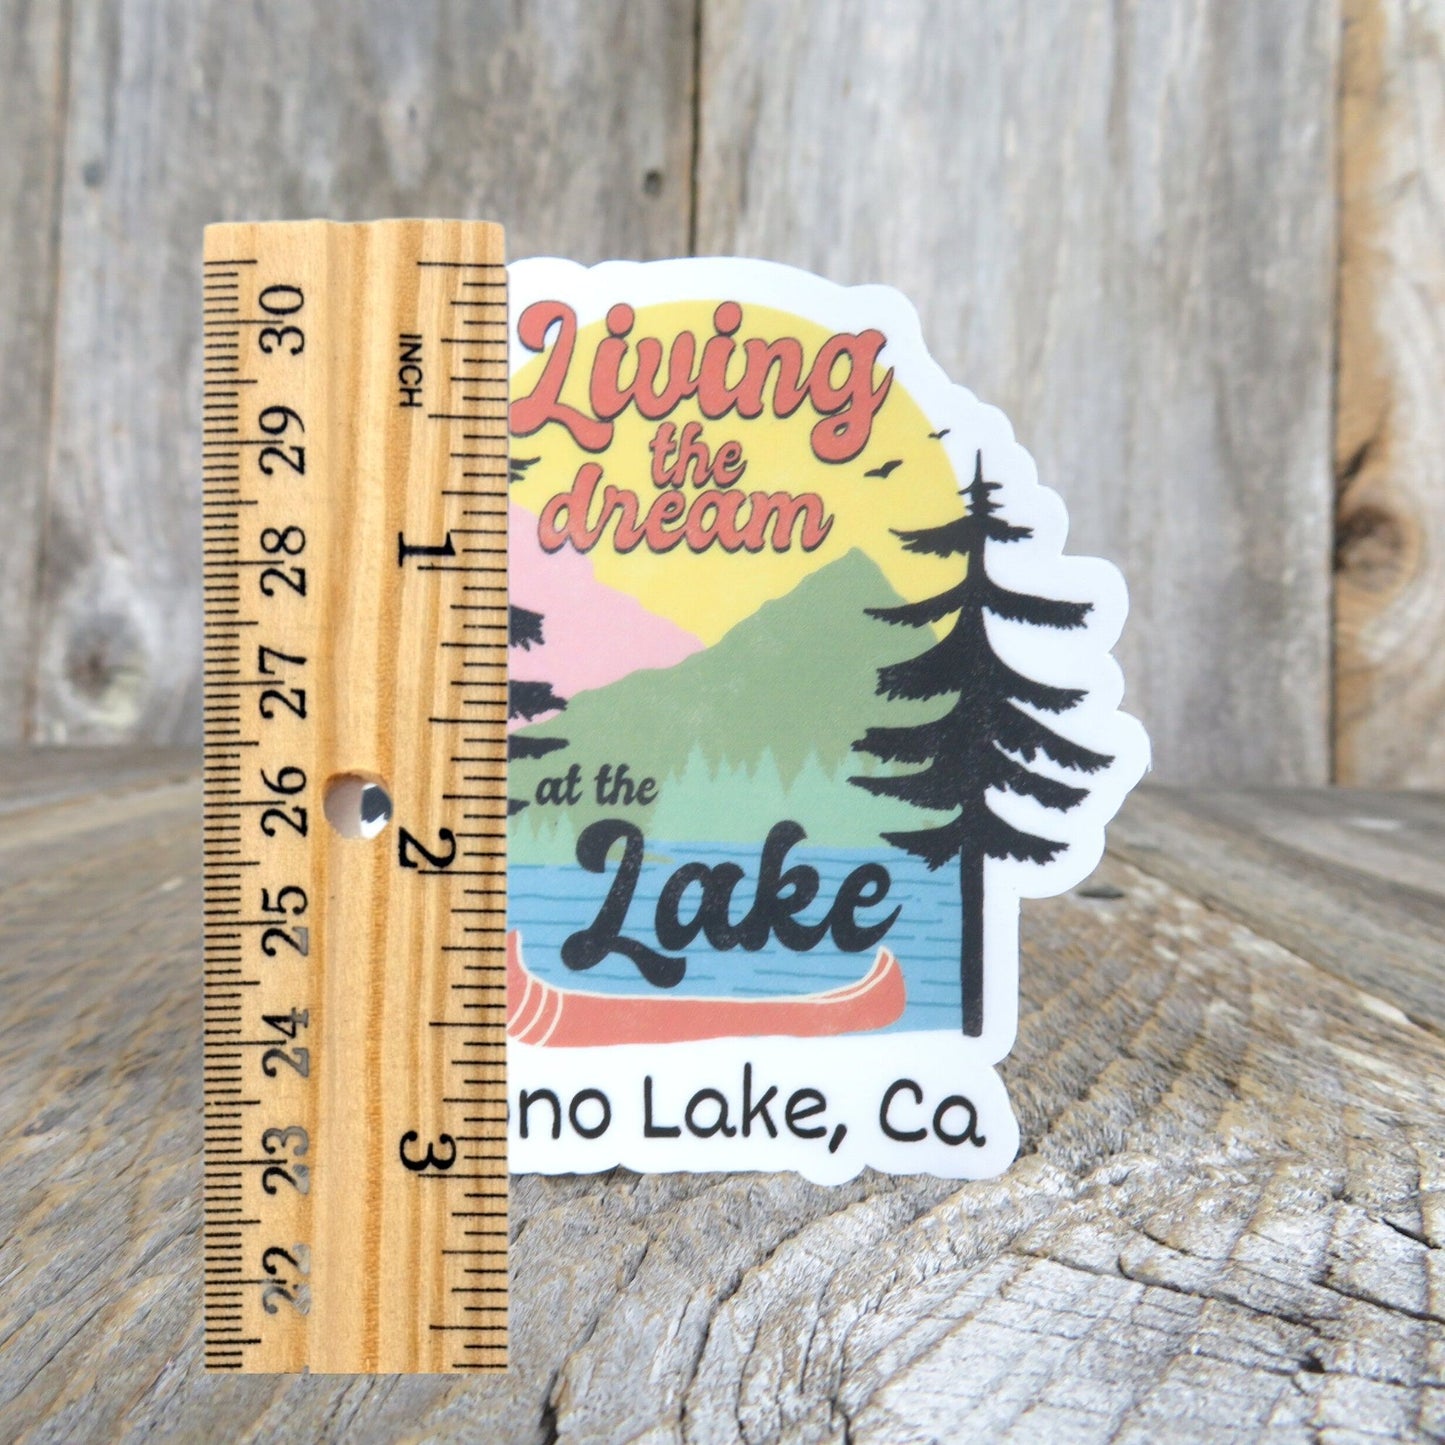 Mono Lake California, Living the Dream at the Lake Sticker Waterproof Boating Fishing Water Sports Camping Outdoors Retro Colors